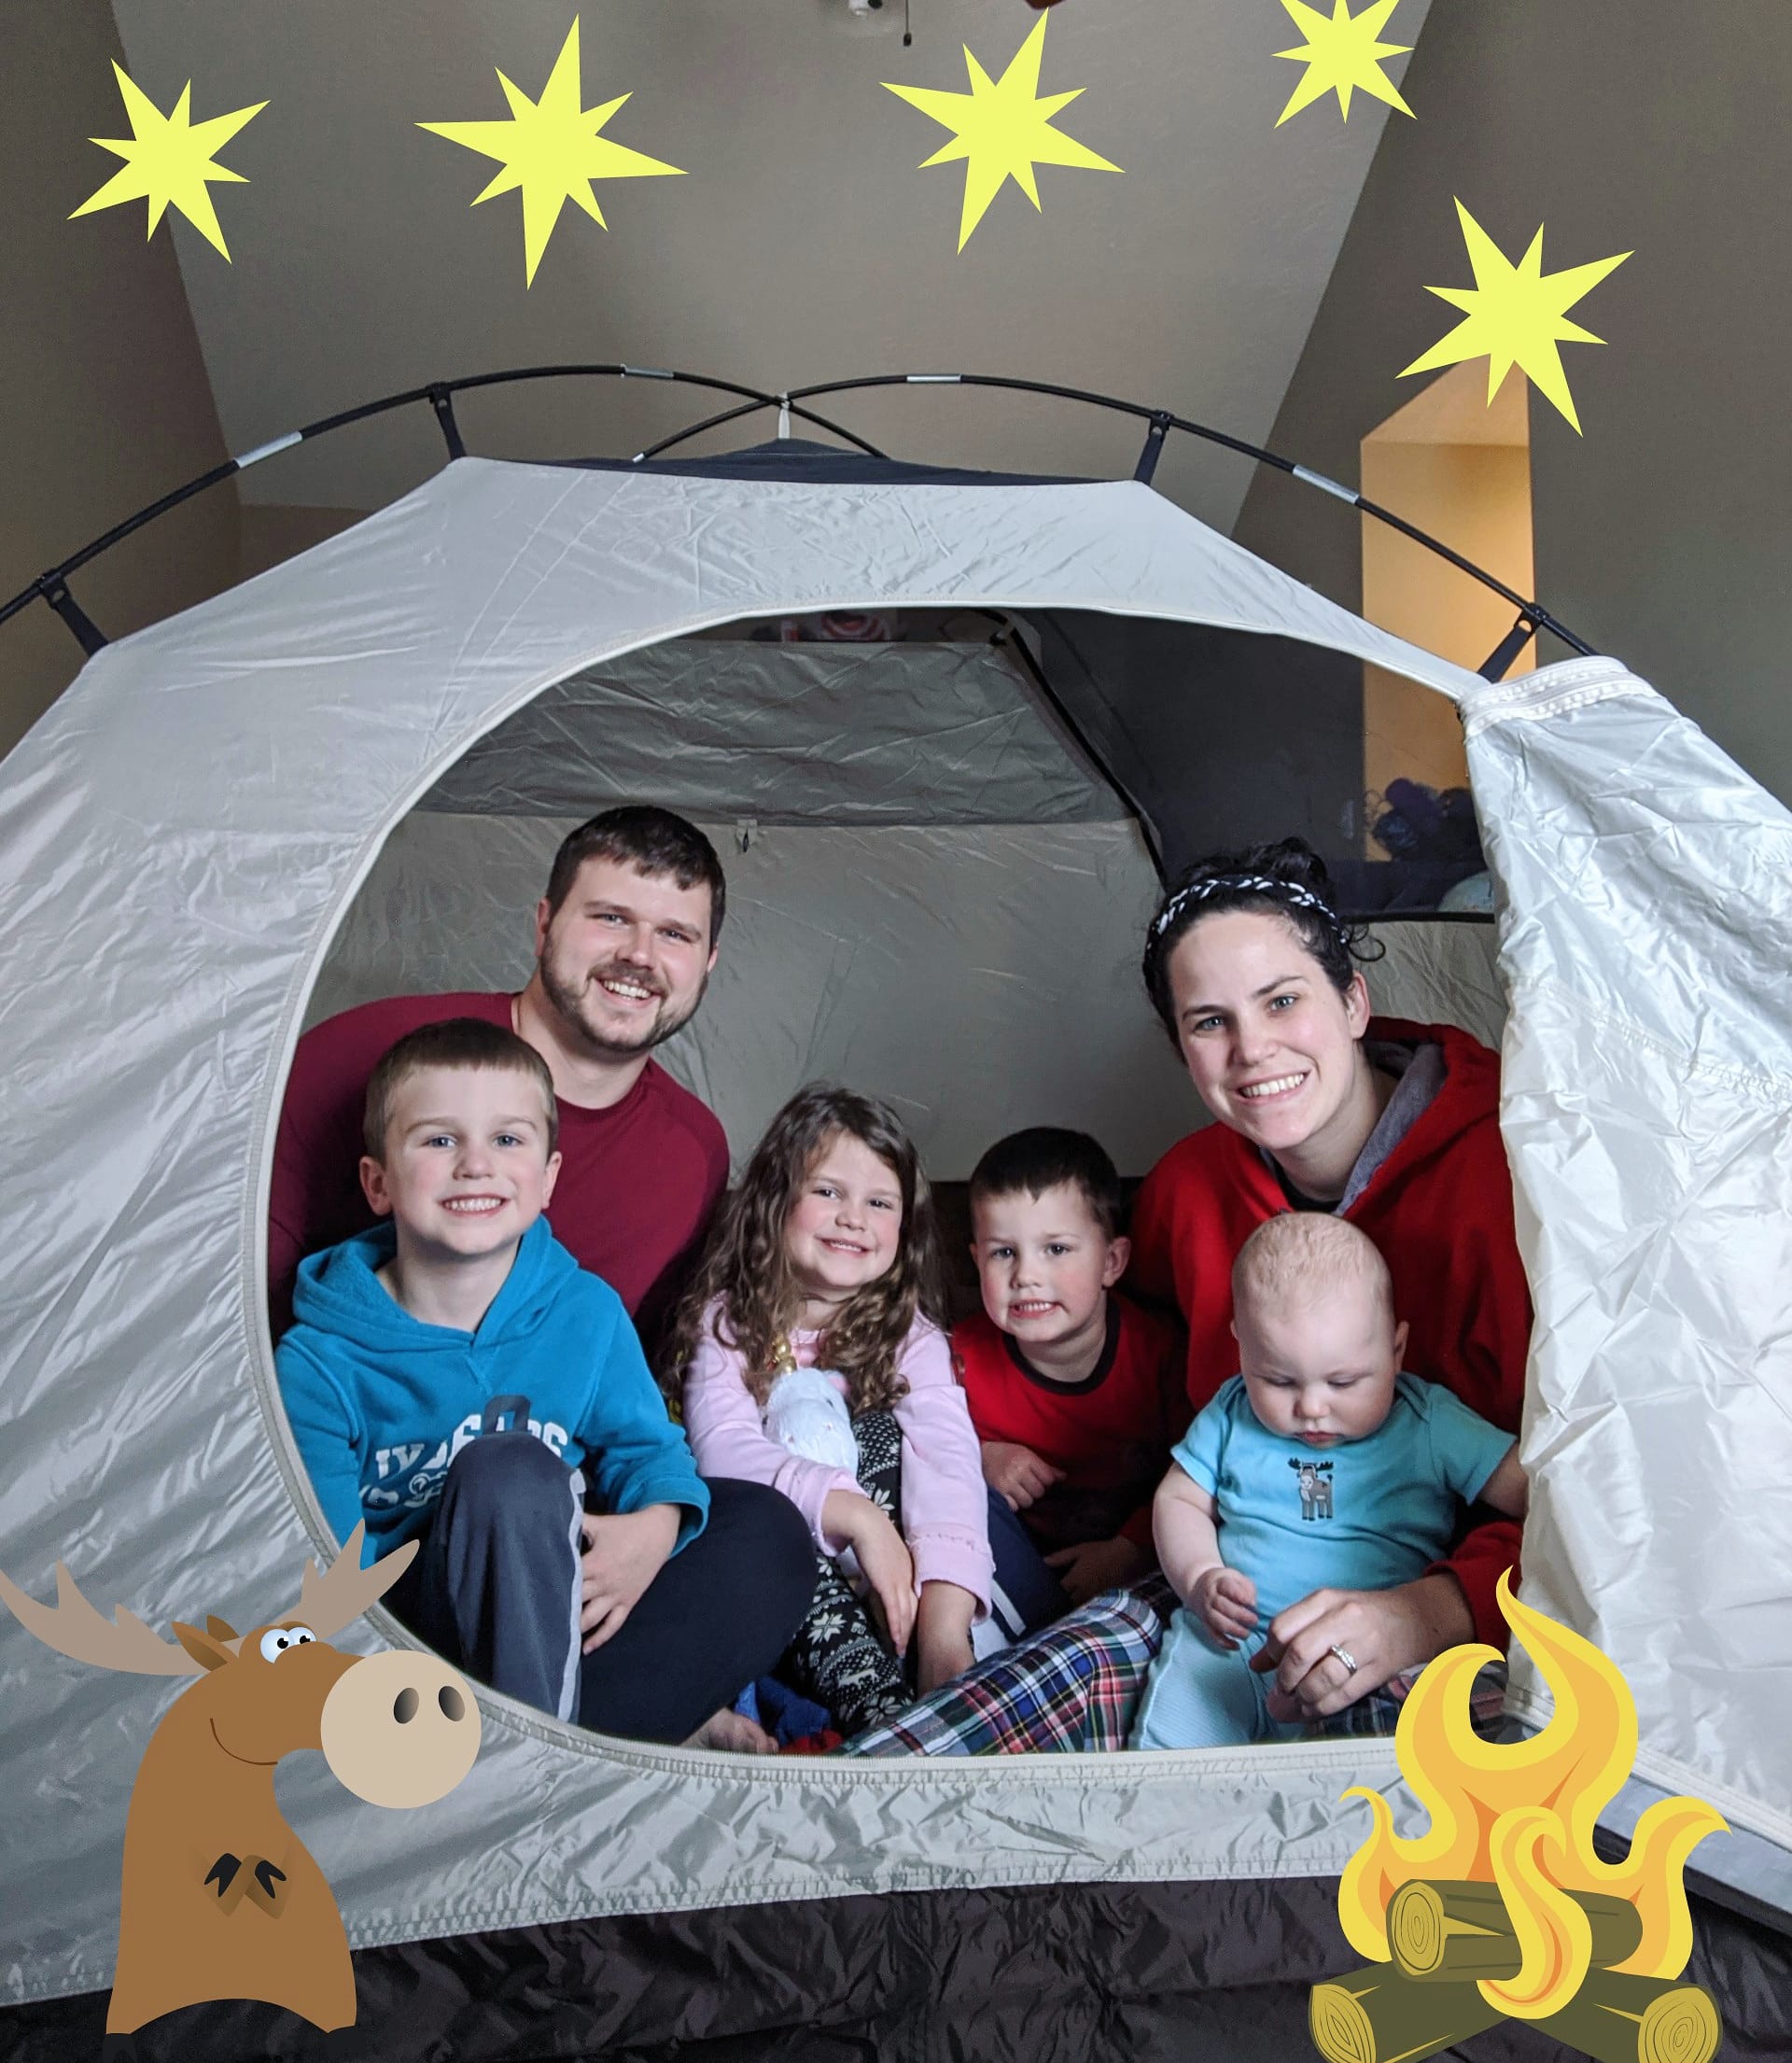 15 Indoor Camping Ideas for Kids  Camping activities for kids, Indoor fun, Indoor  camping party